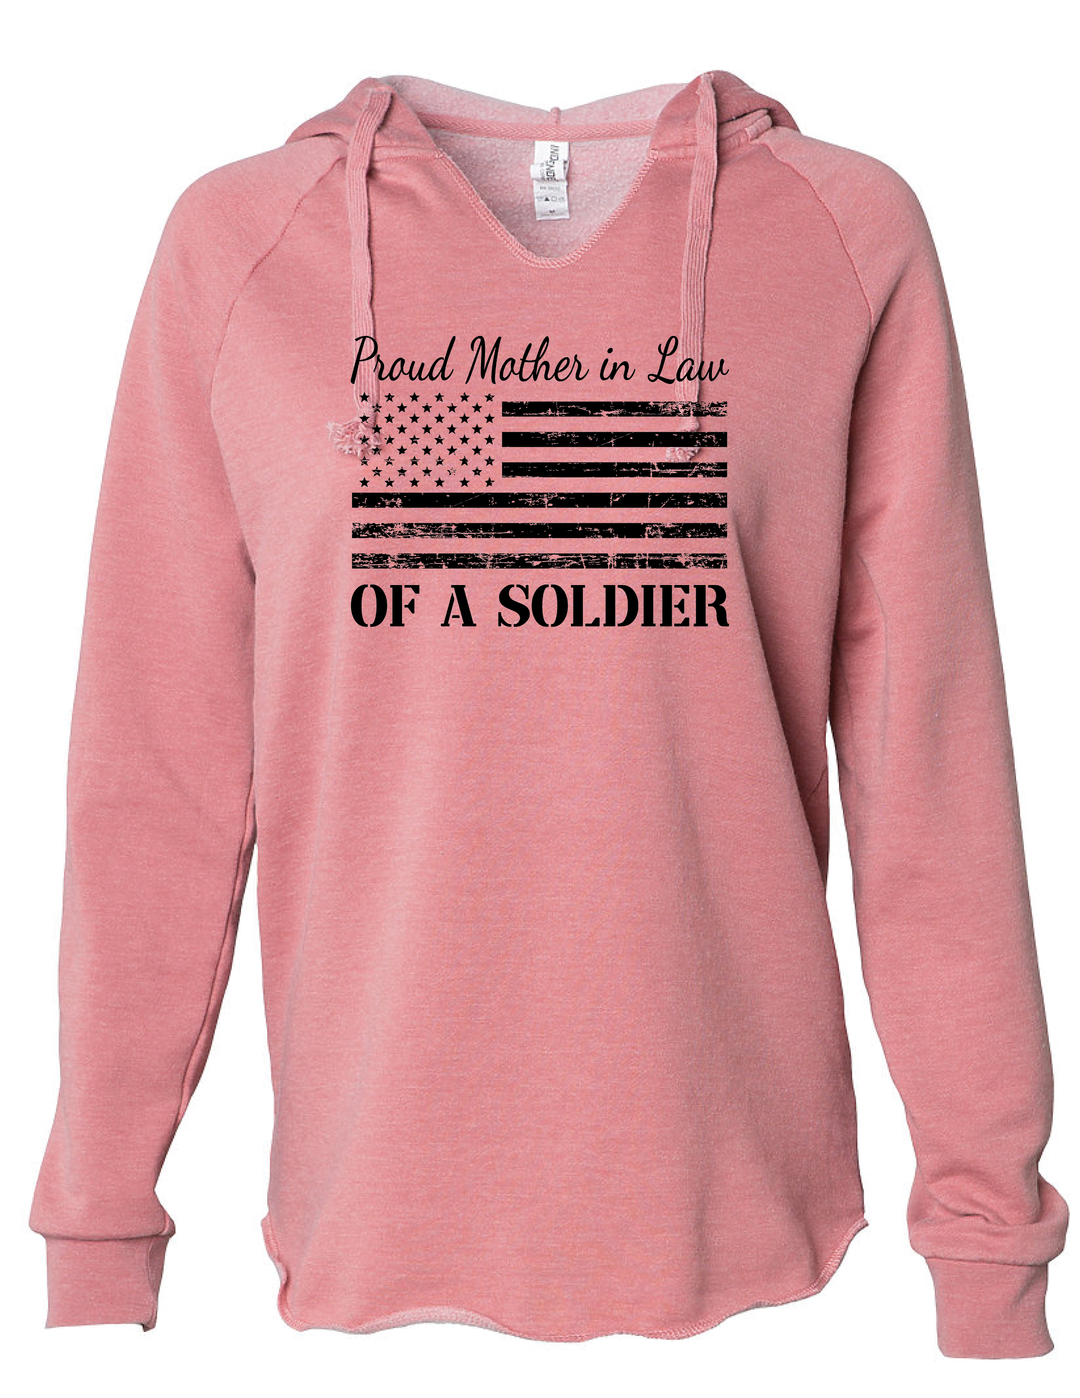 Proud Mother in Law of a Soldier Sweatshirt (Pink)